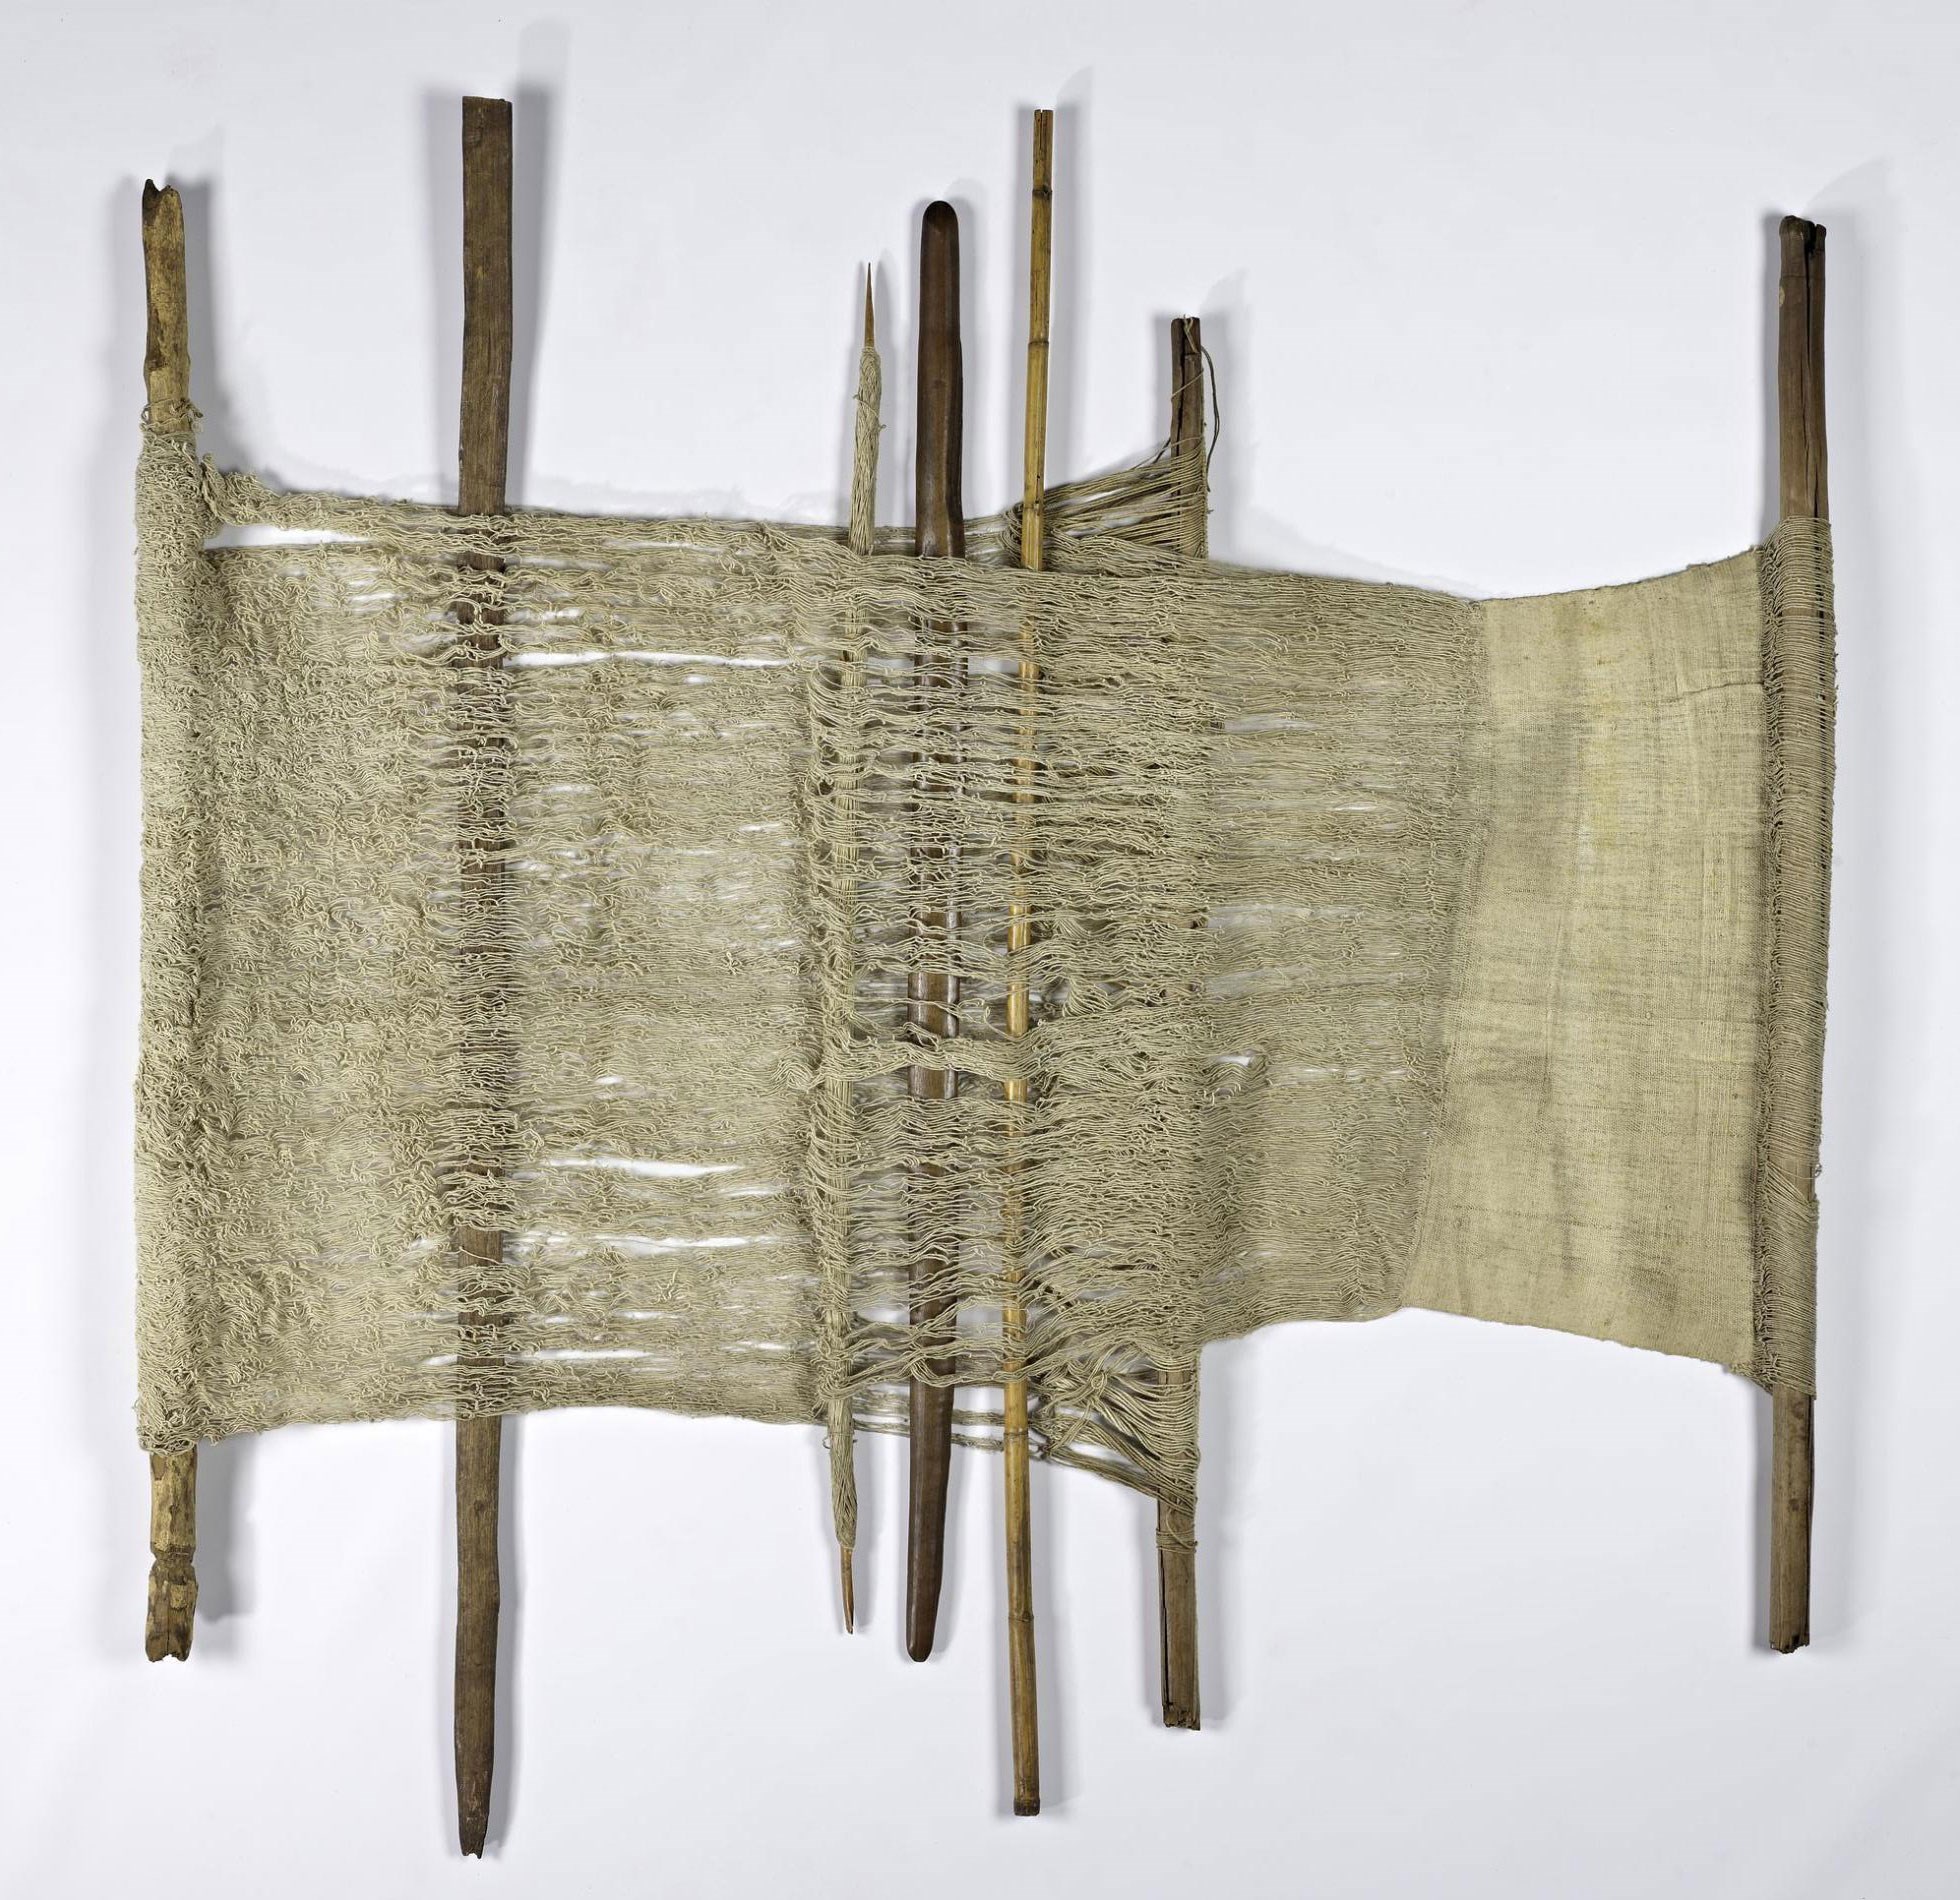 Weaving loom collected by David Livingstone